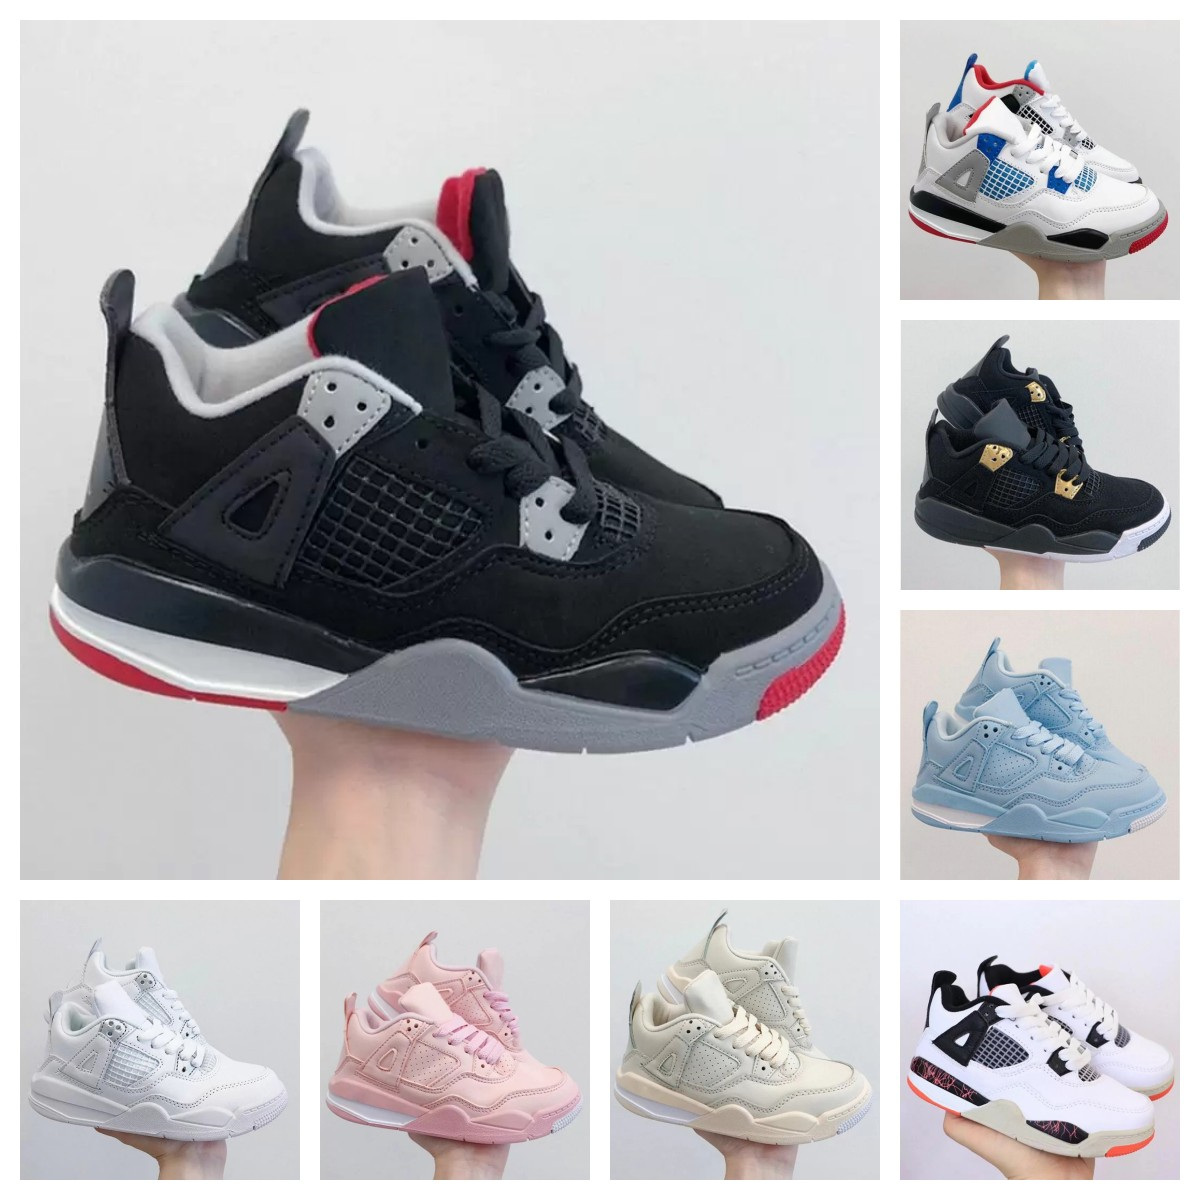 

Jumpman 4 Basketball Shoes Designer Kids toddler sneakers girls TD 4s Chicago classico red white Boys Girl infant Running Pour Enfants Athletic sport Sneakers 28-35, Color 10